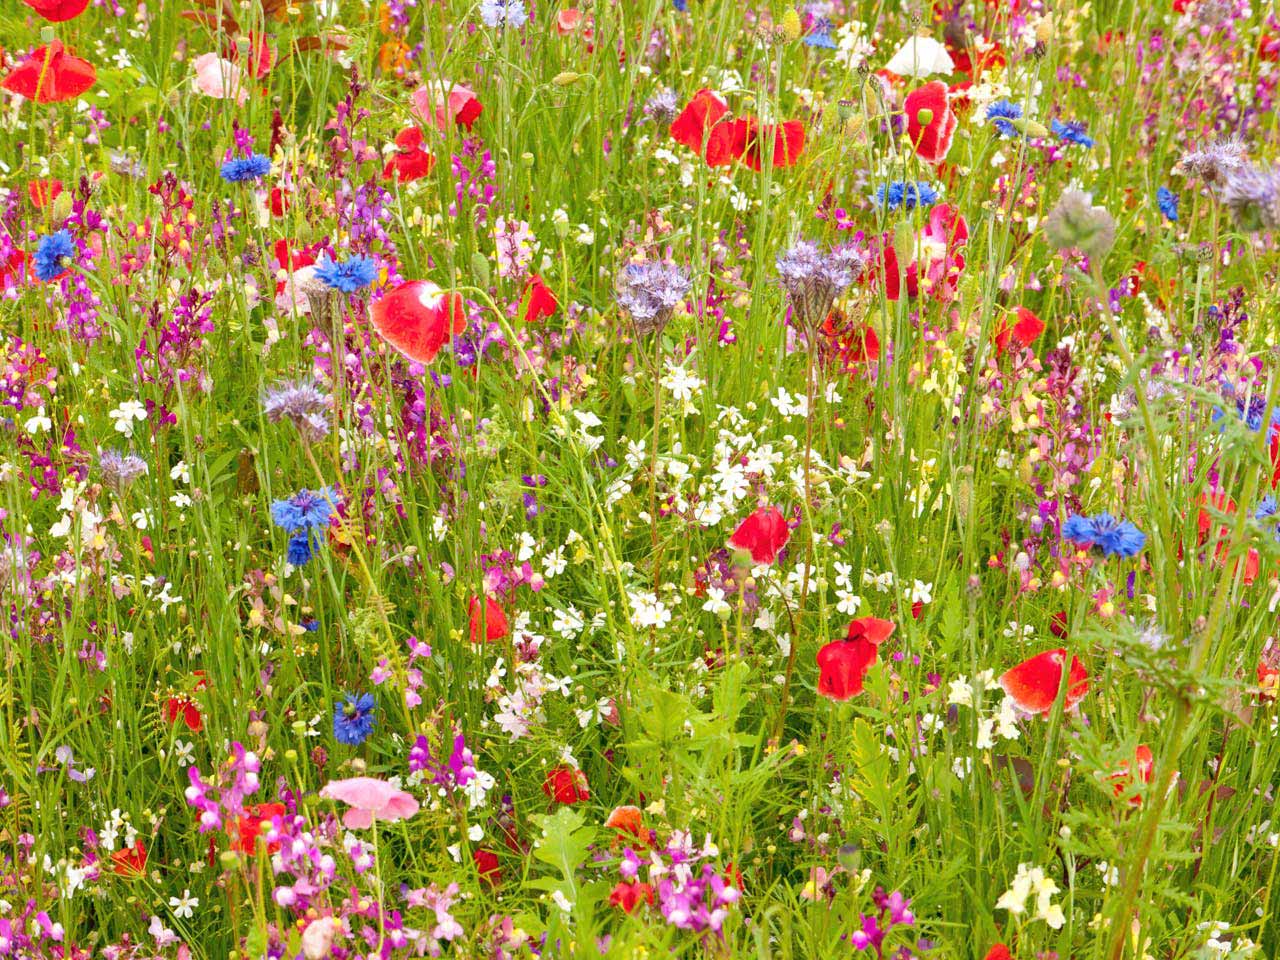 Beautiful meadow with green grass, and bright red, purple and blue flowers